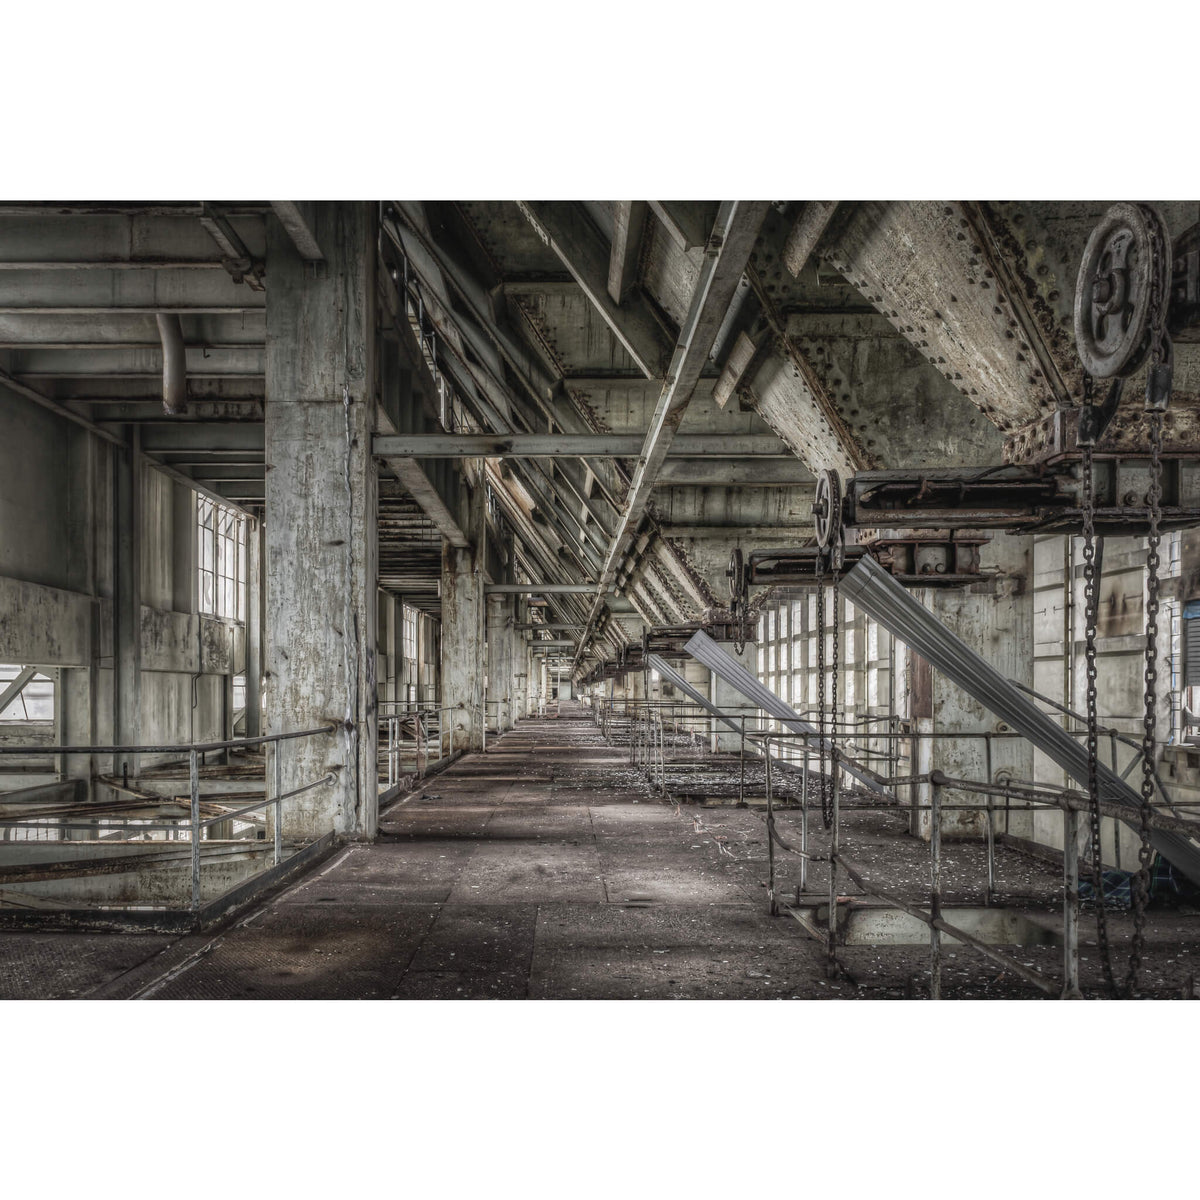 Weigher Floor | Wangi Power Station Fine Art Print - Lost Collective Shop